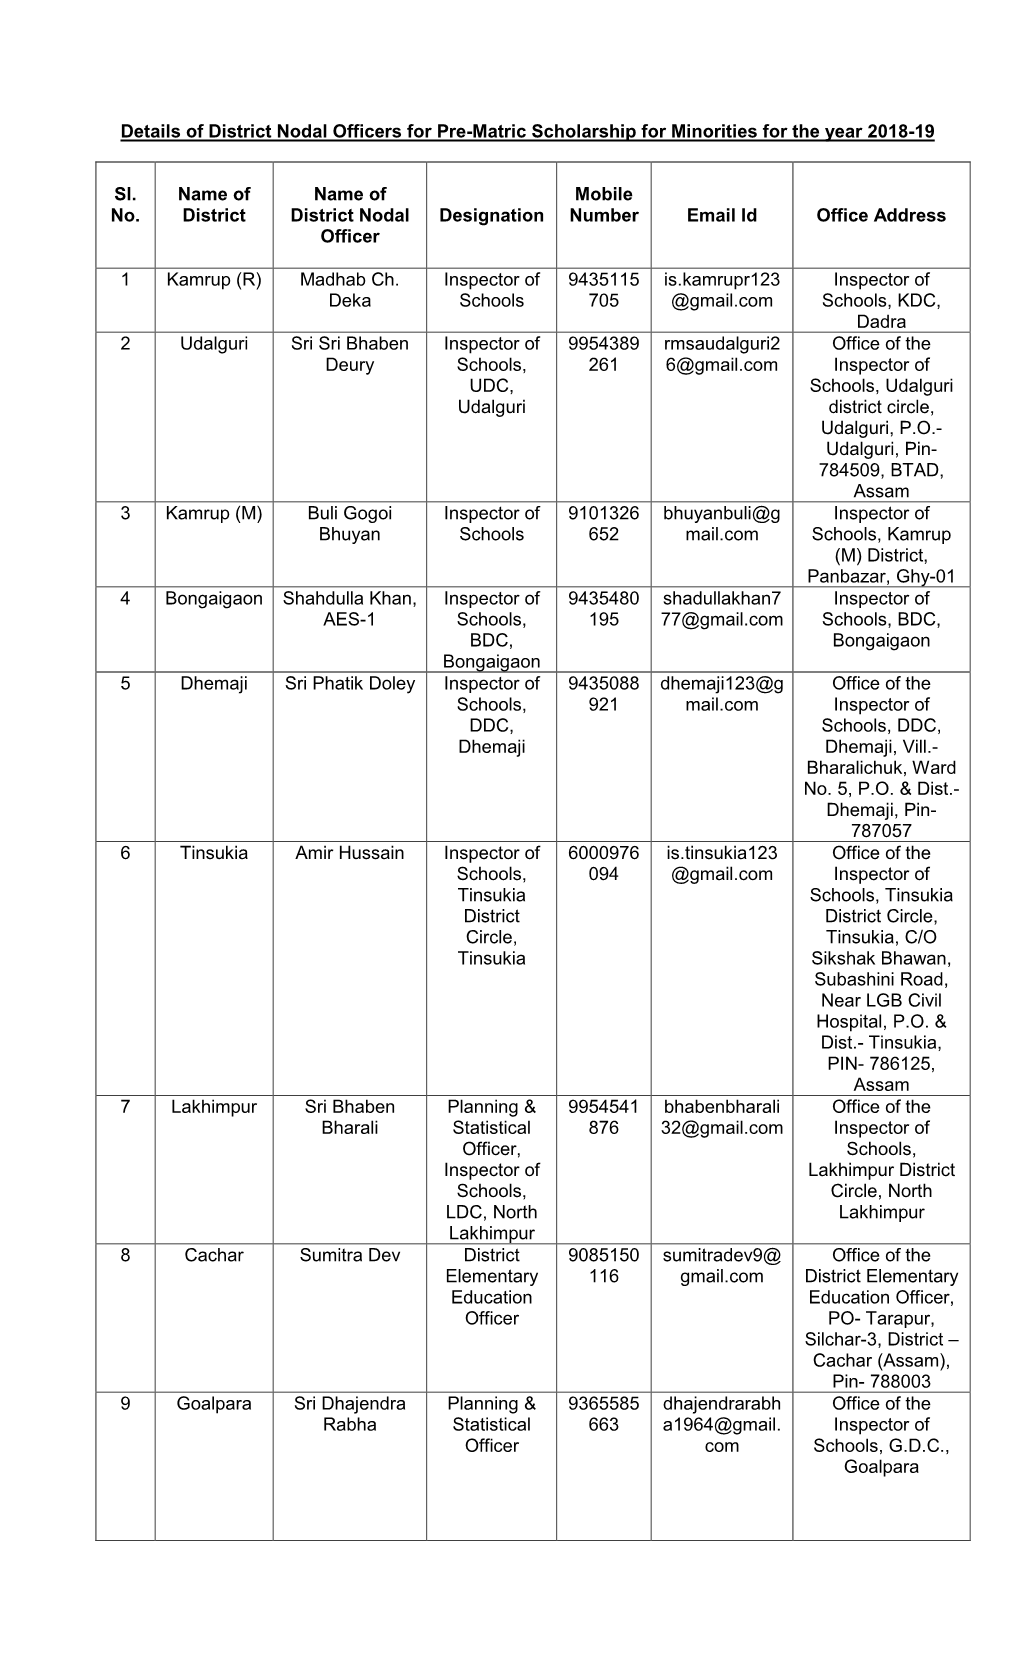 Details of District Nodal Officers for Pre-Matric Scholarship for Minorities for the Year 2018-19